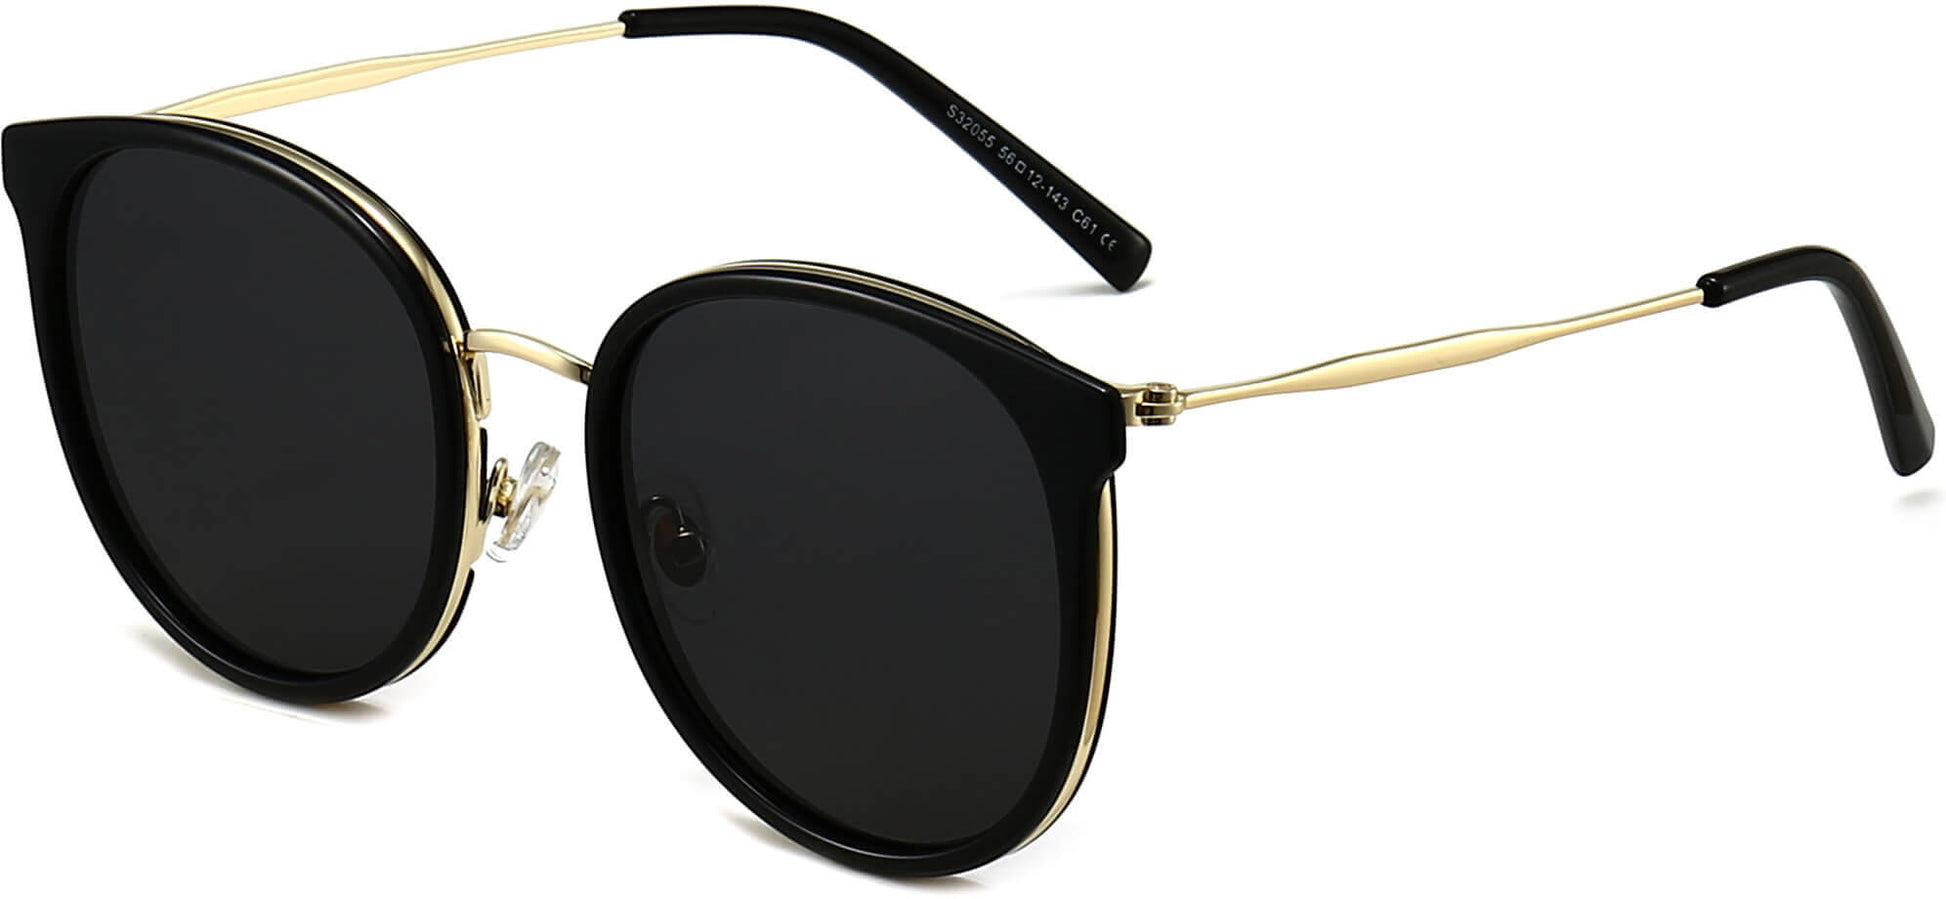 Brody Black Plastic Sunglasses from ANRRI, angle view